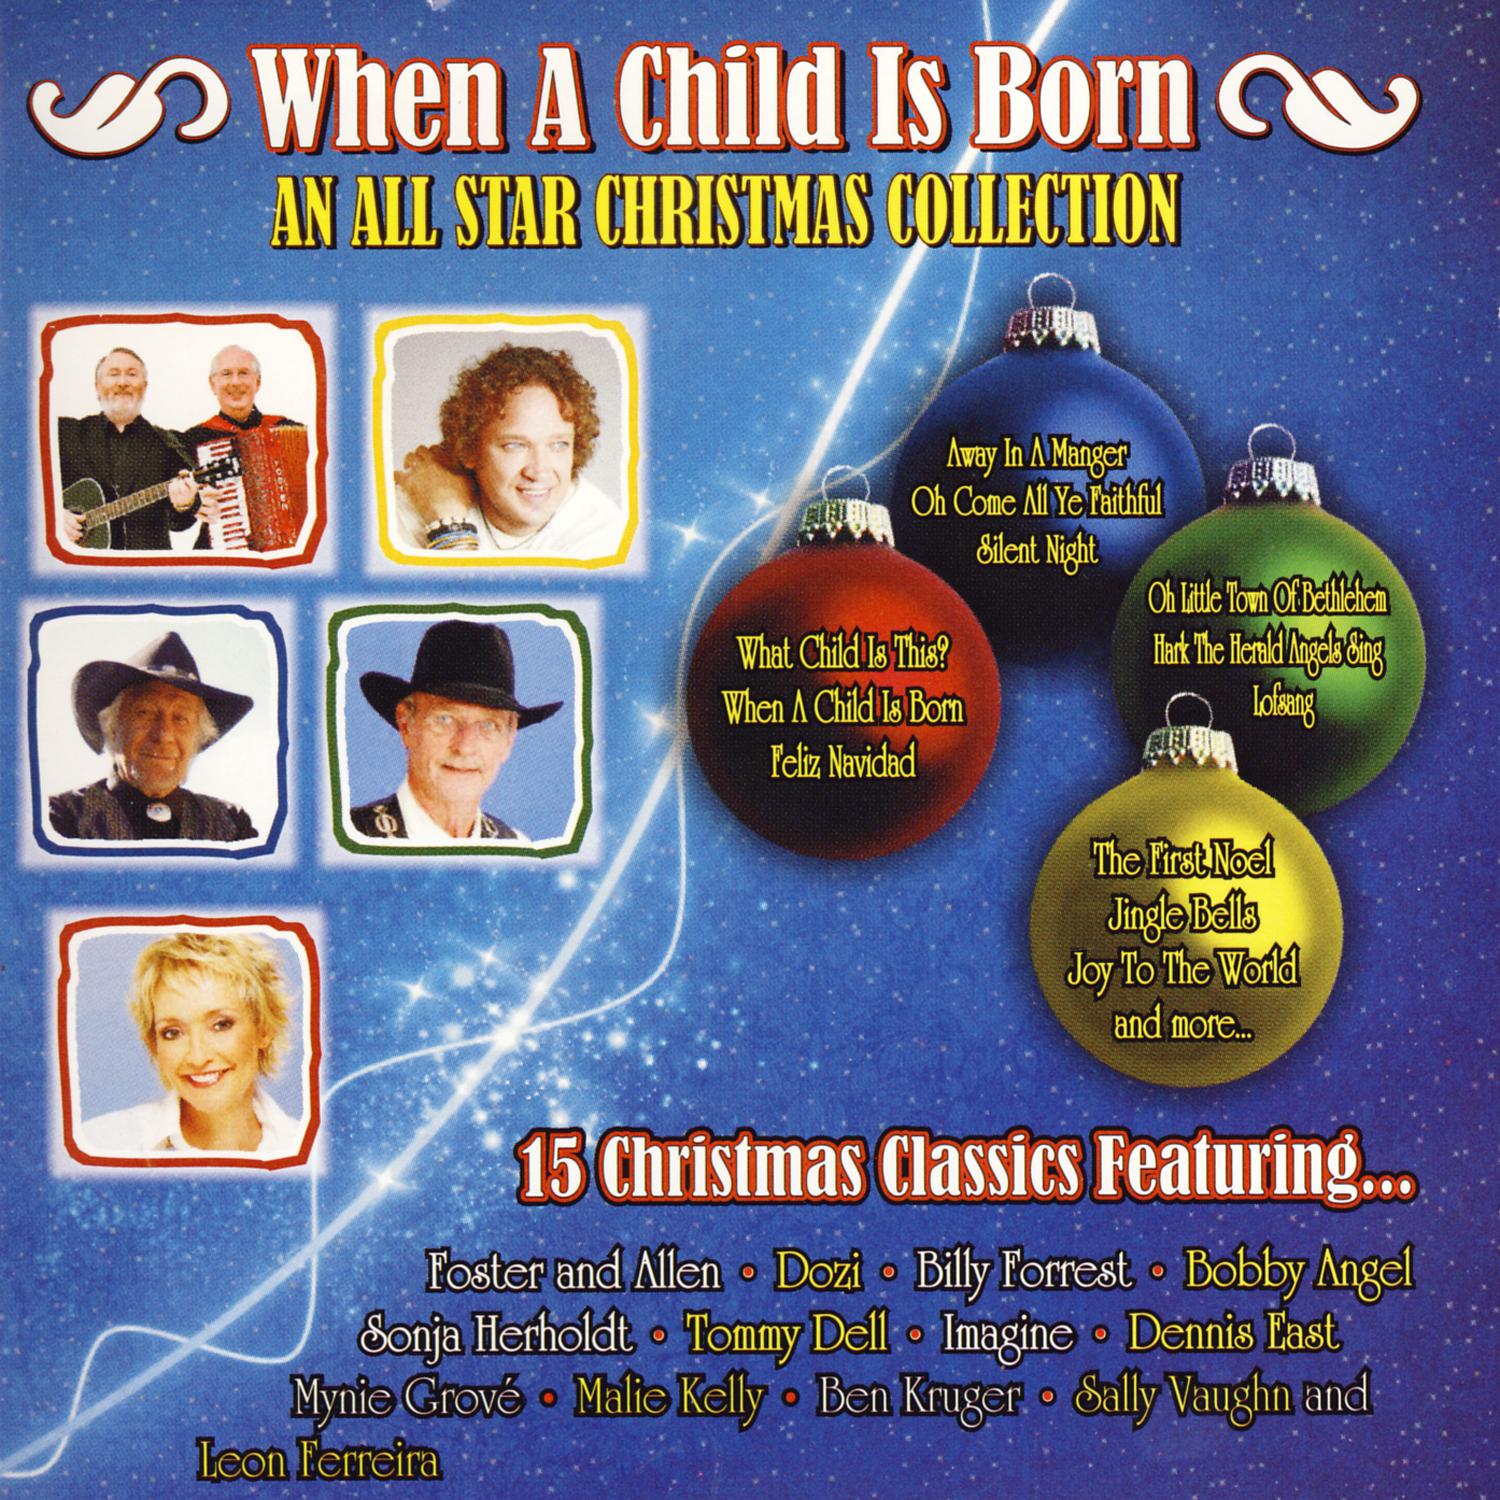 When a Child is Born: An All Star Christmas Collection